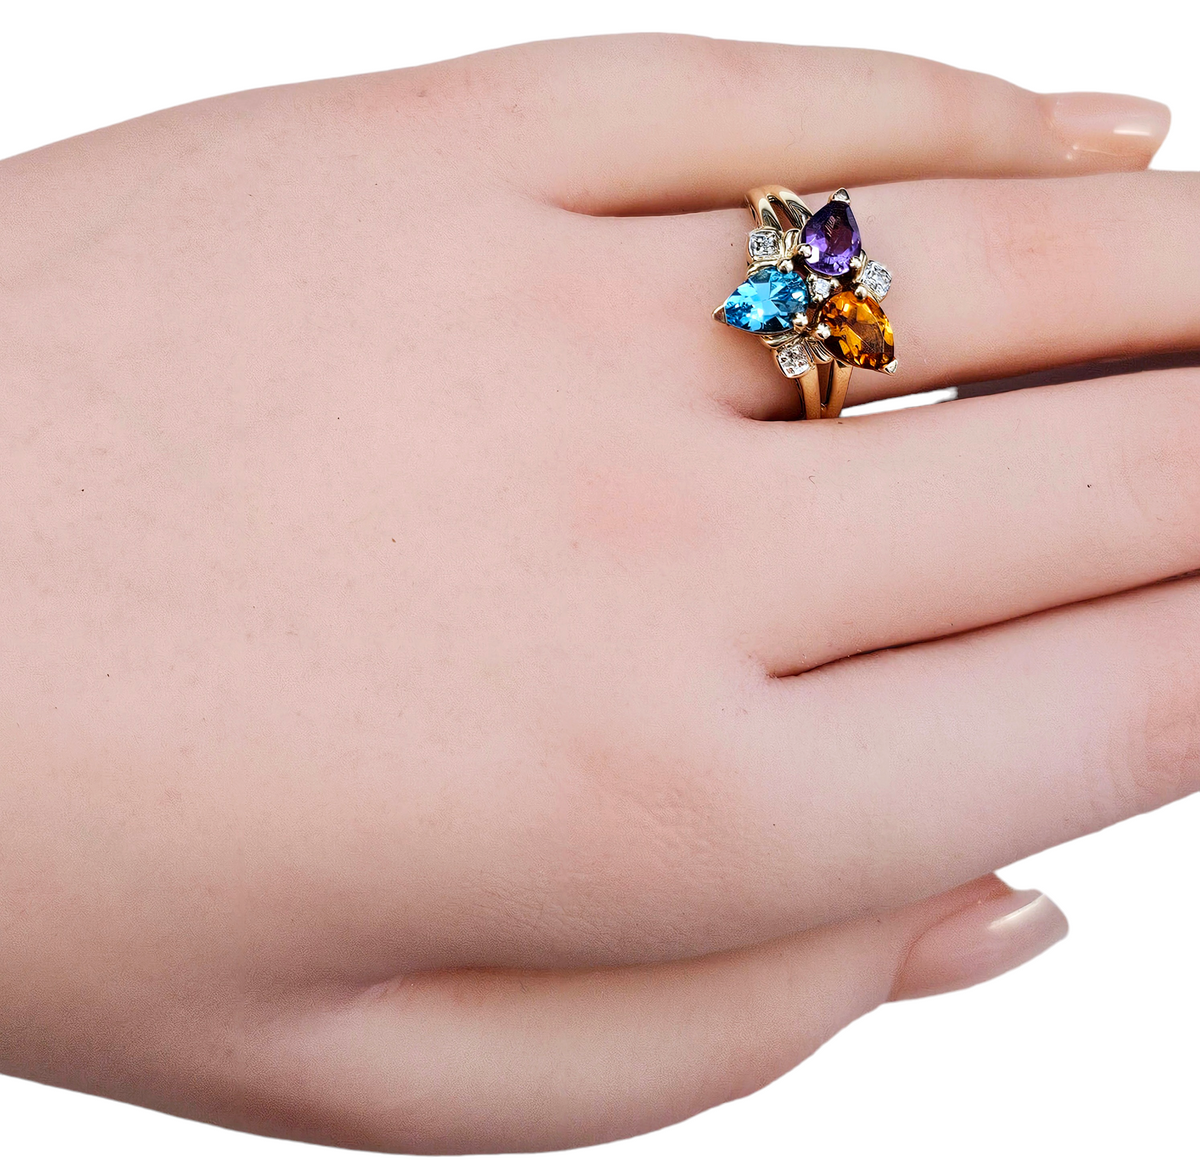 Pear Shaped Blue Topaz, Citrine, Amethyst and Diamond Trinity Ring made in 10-Karat Yellow Gold